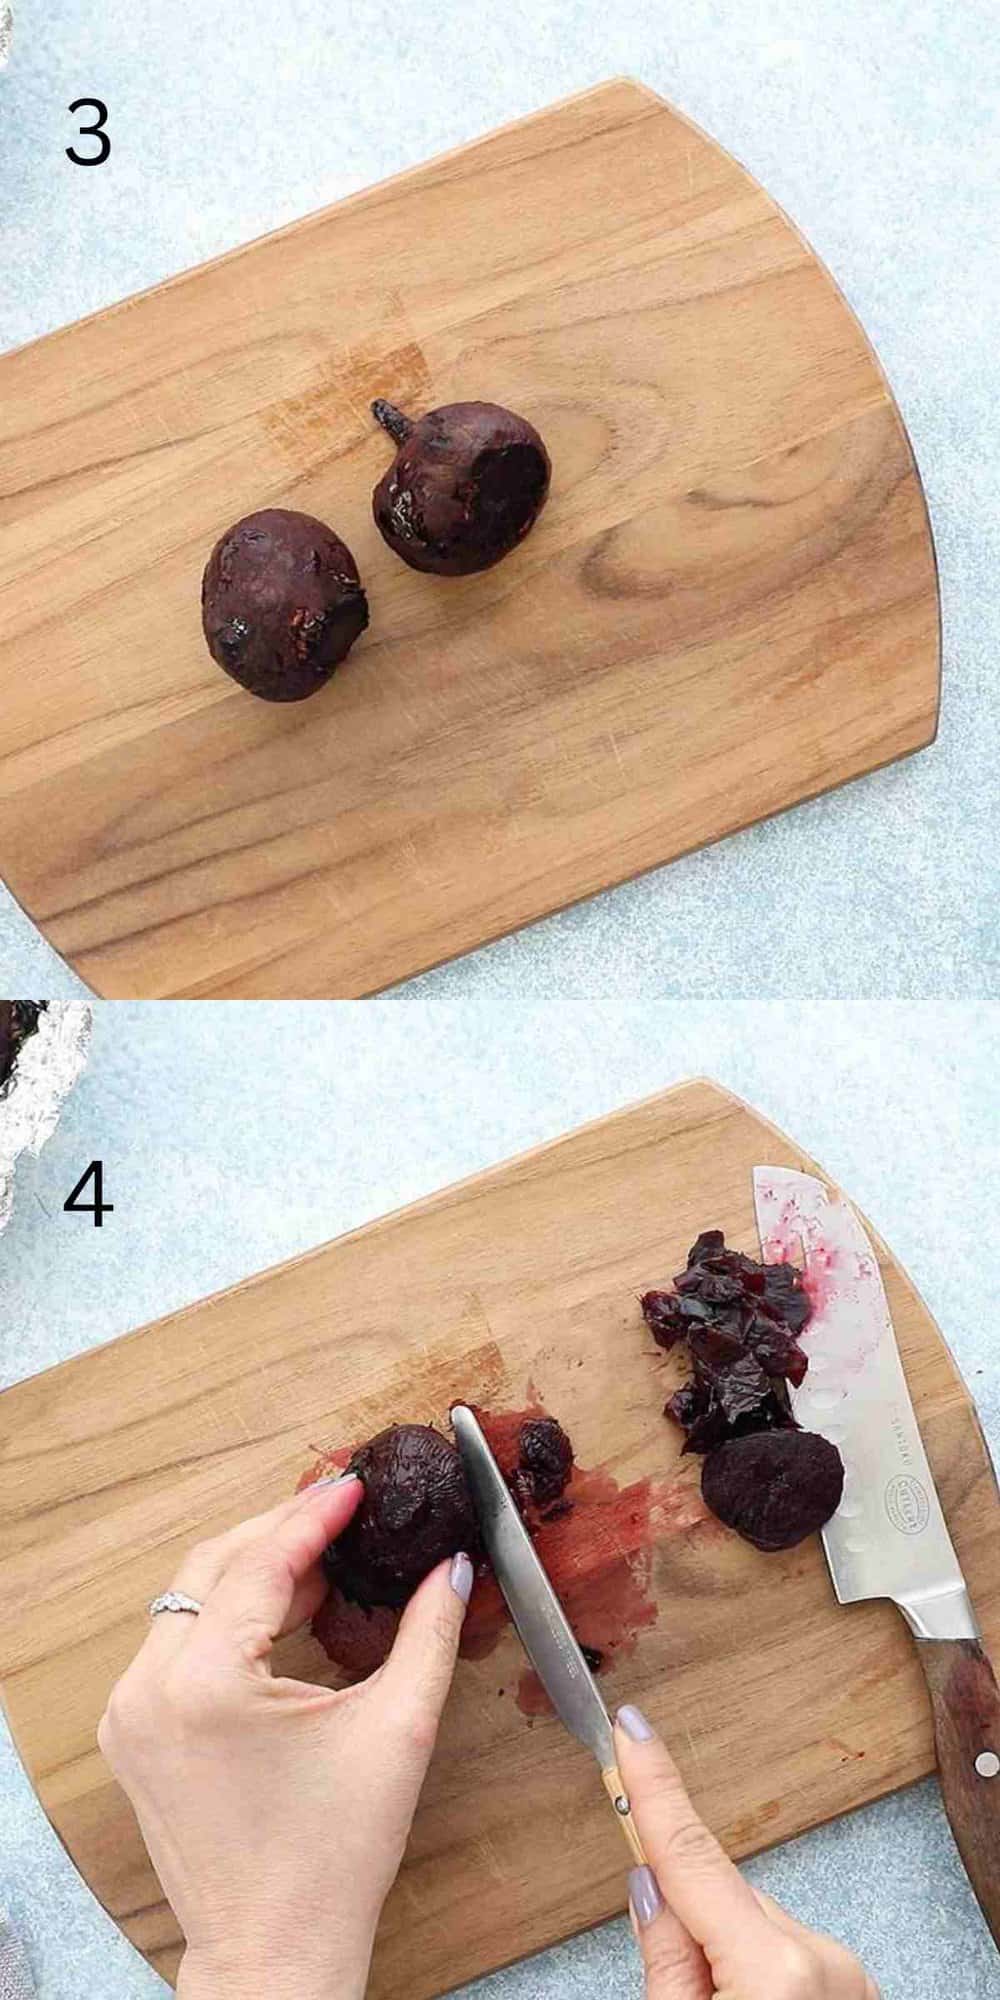 two photo collage of two hands chopping 2 beets on a wooden cutting board.